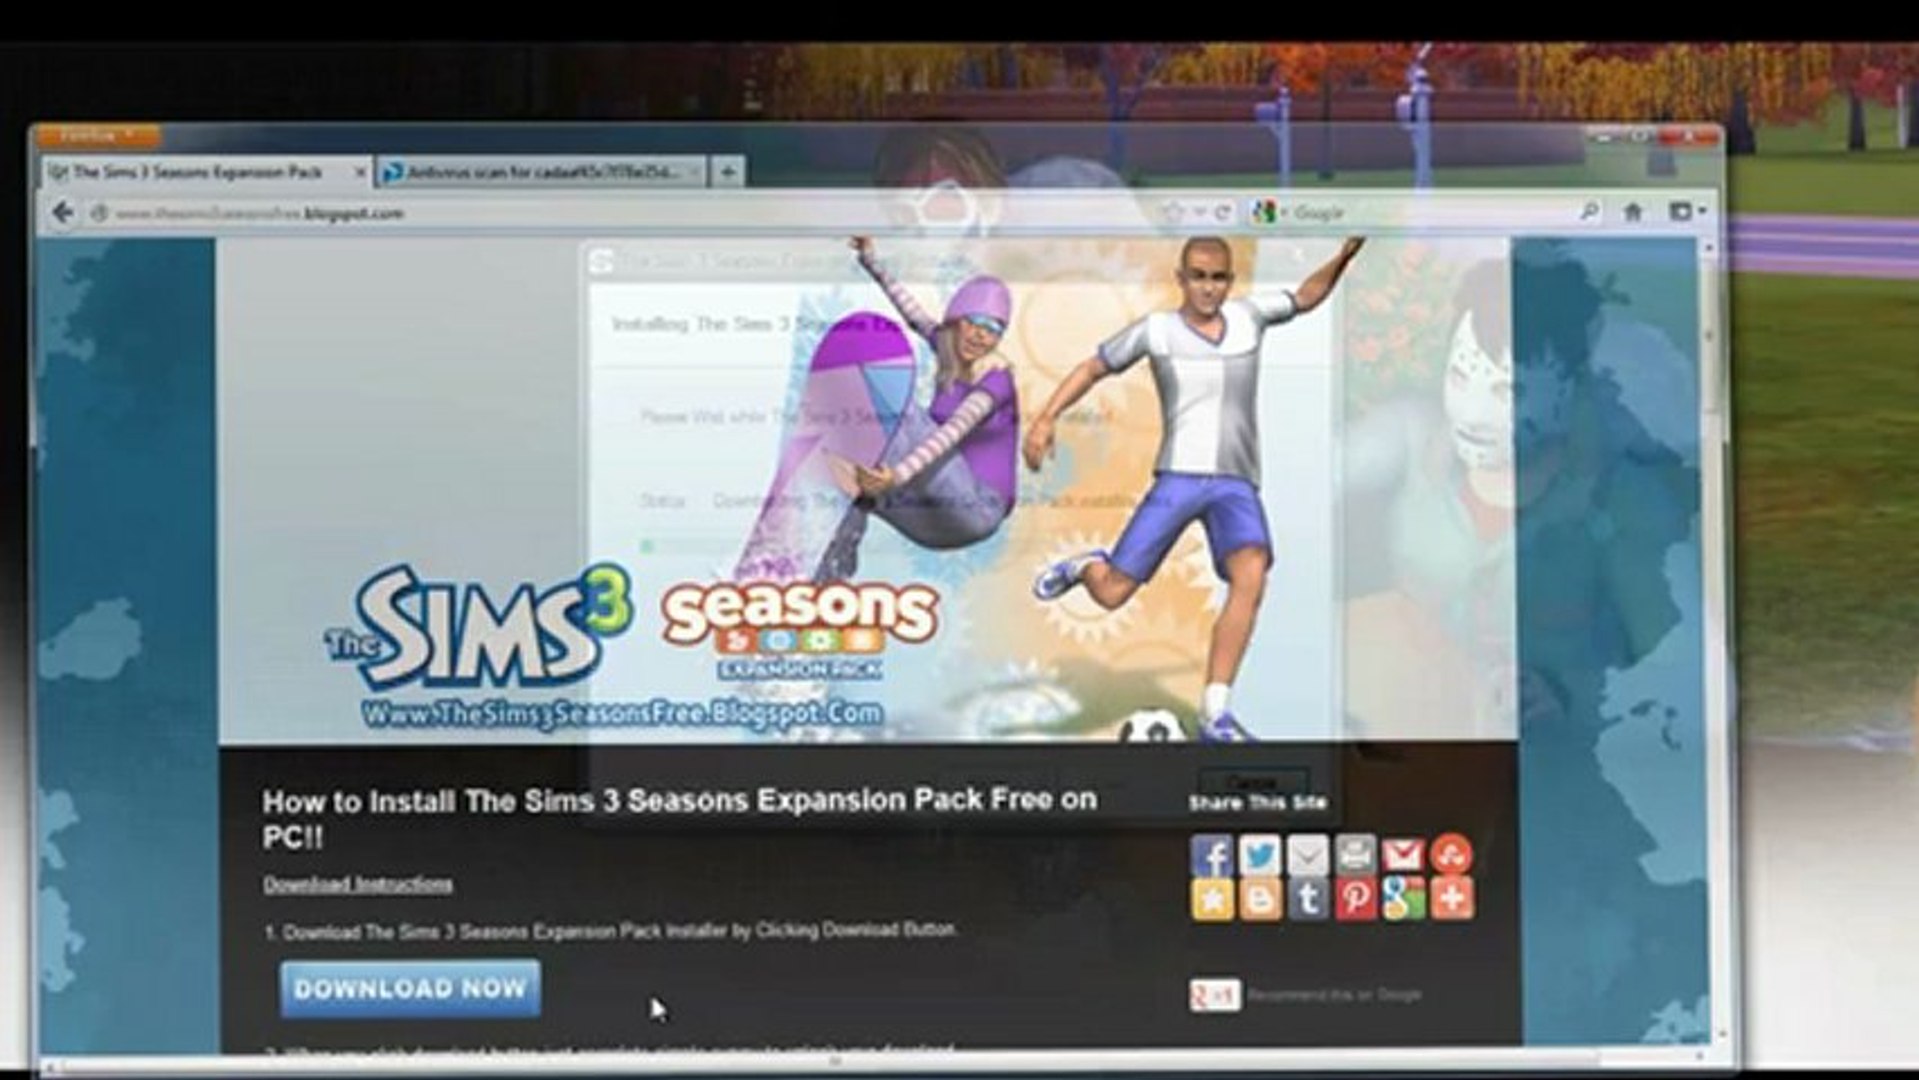 Download The Sims 3 Seasons Expansion Pack DLC Installer Free!! - video  Dailymotion